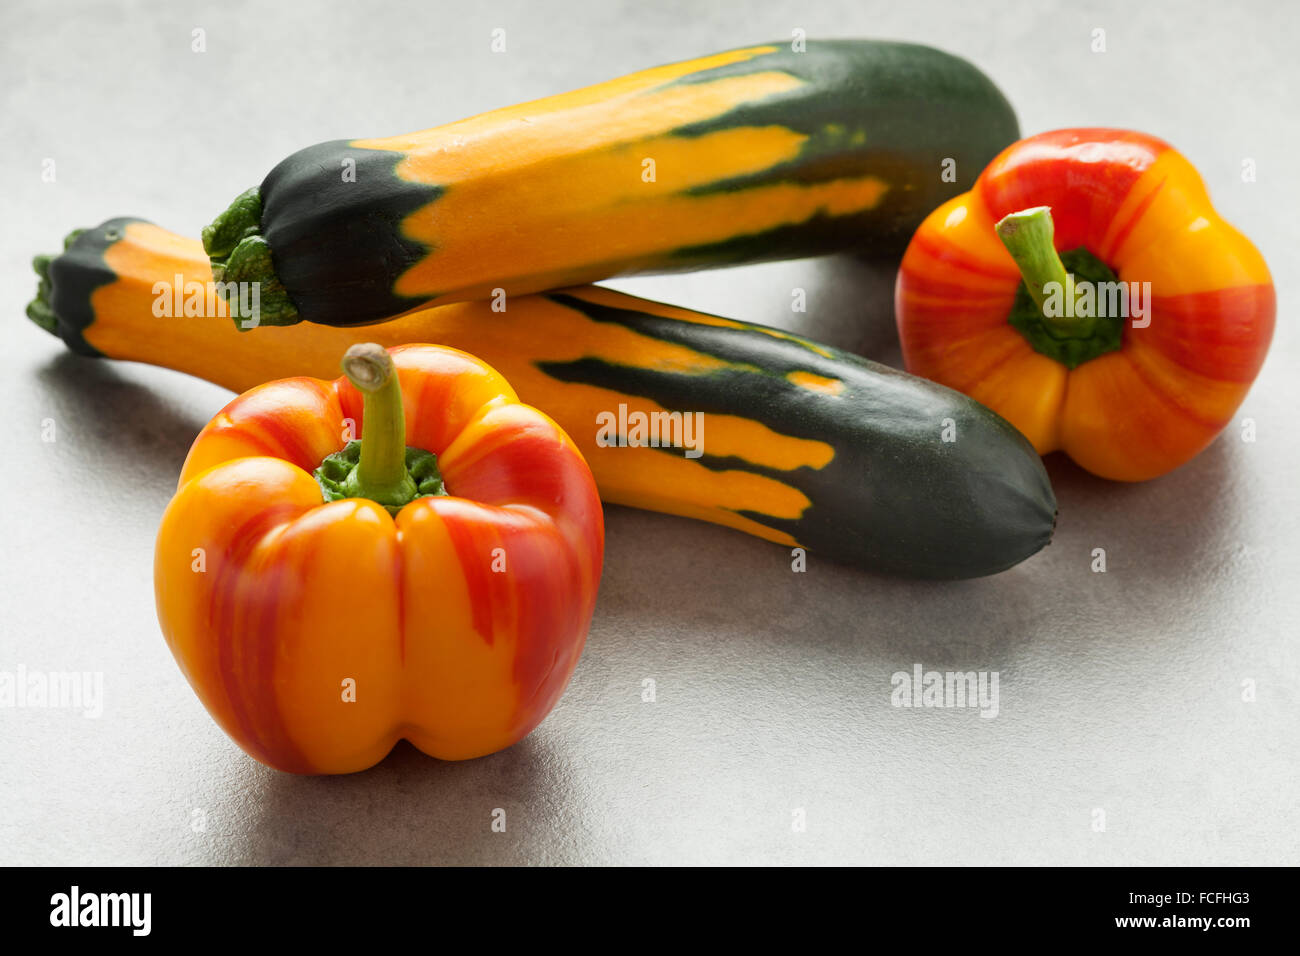 Fresh raw striped yellow and red peppers and green yellow striped zucchini Stock Photo